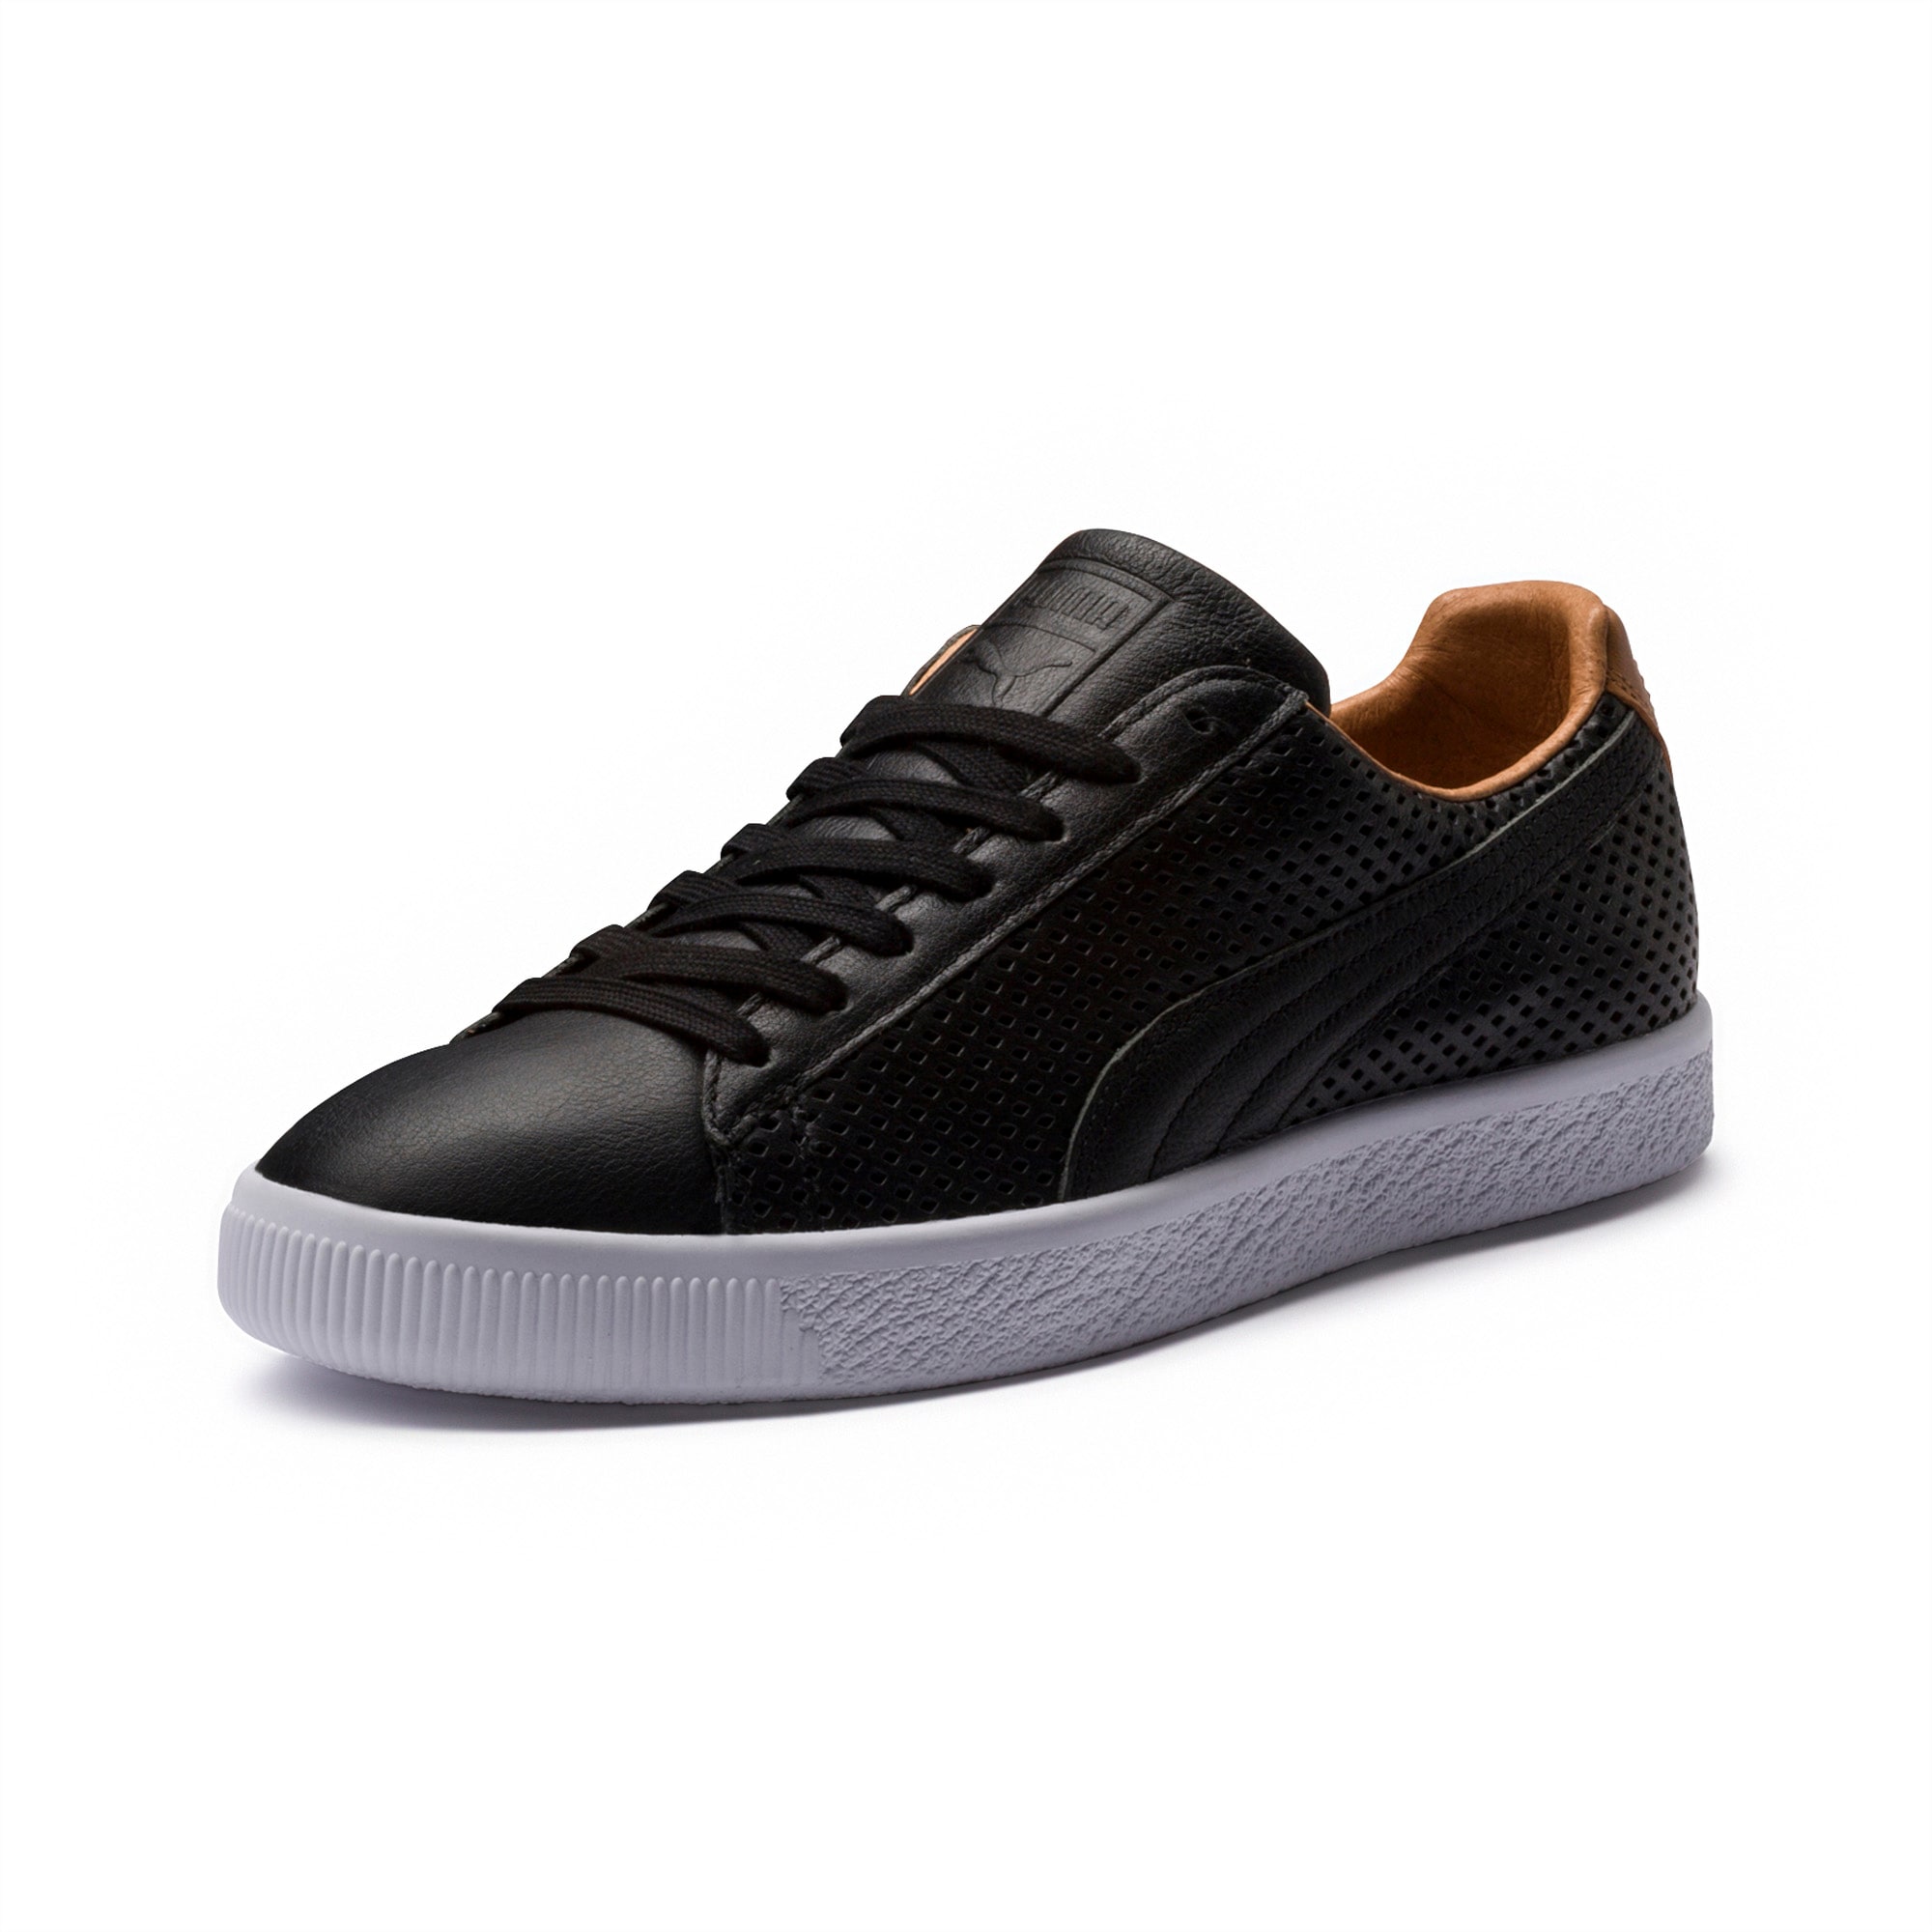 Clyde Colorblock 2 Sneakers | PUMA US